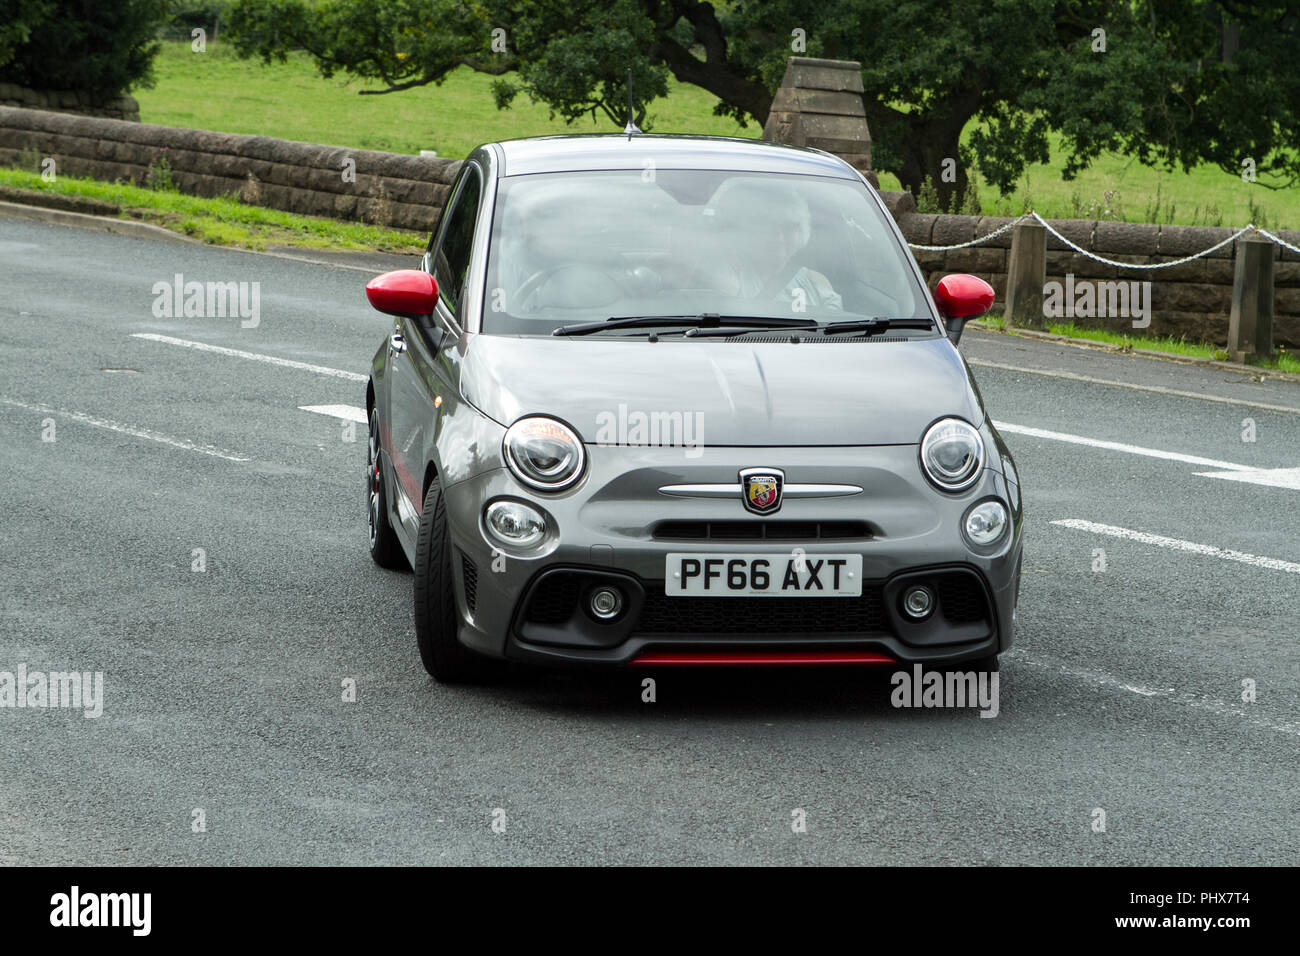 2016 Fiat Abarth 595 Turismo at Hoghton towers annual classic vintage car rally, UK Stock Photo